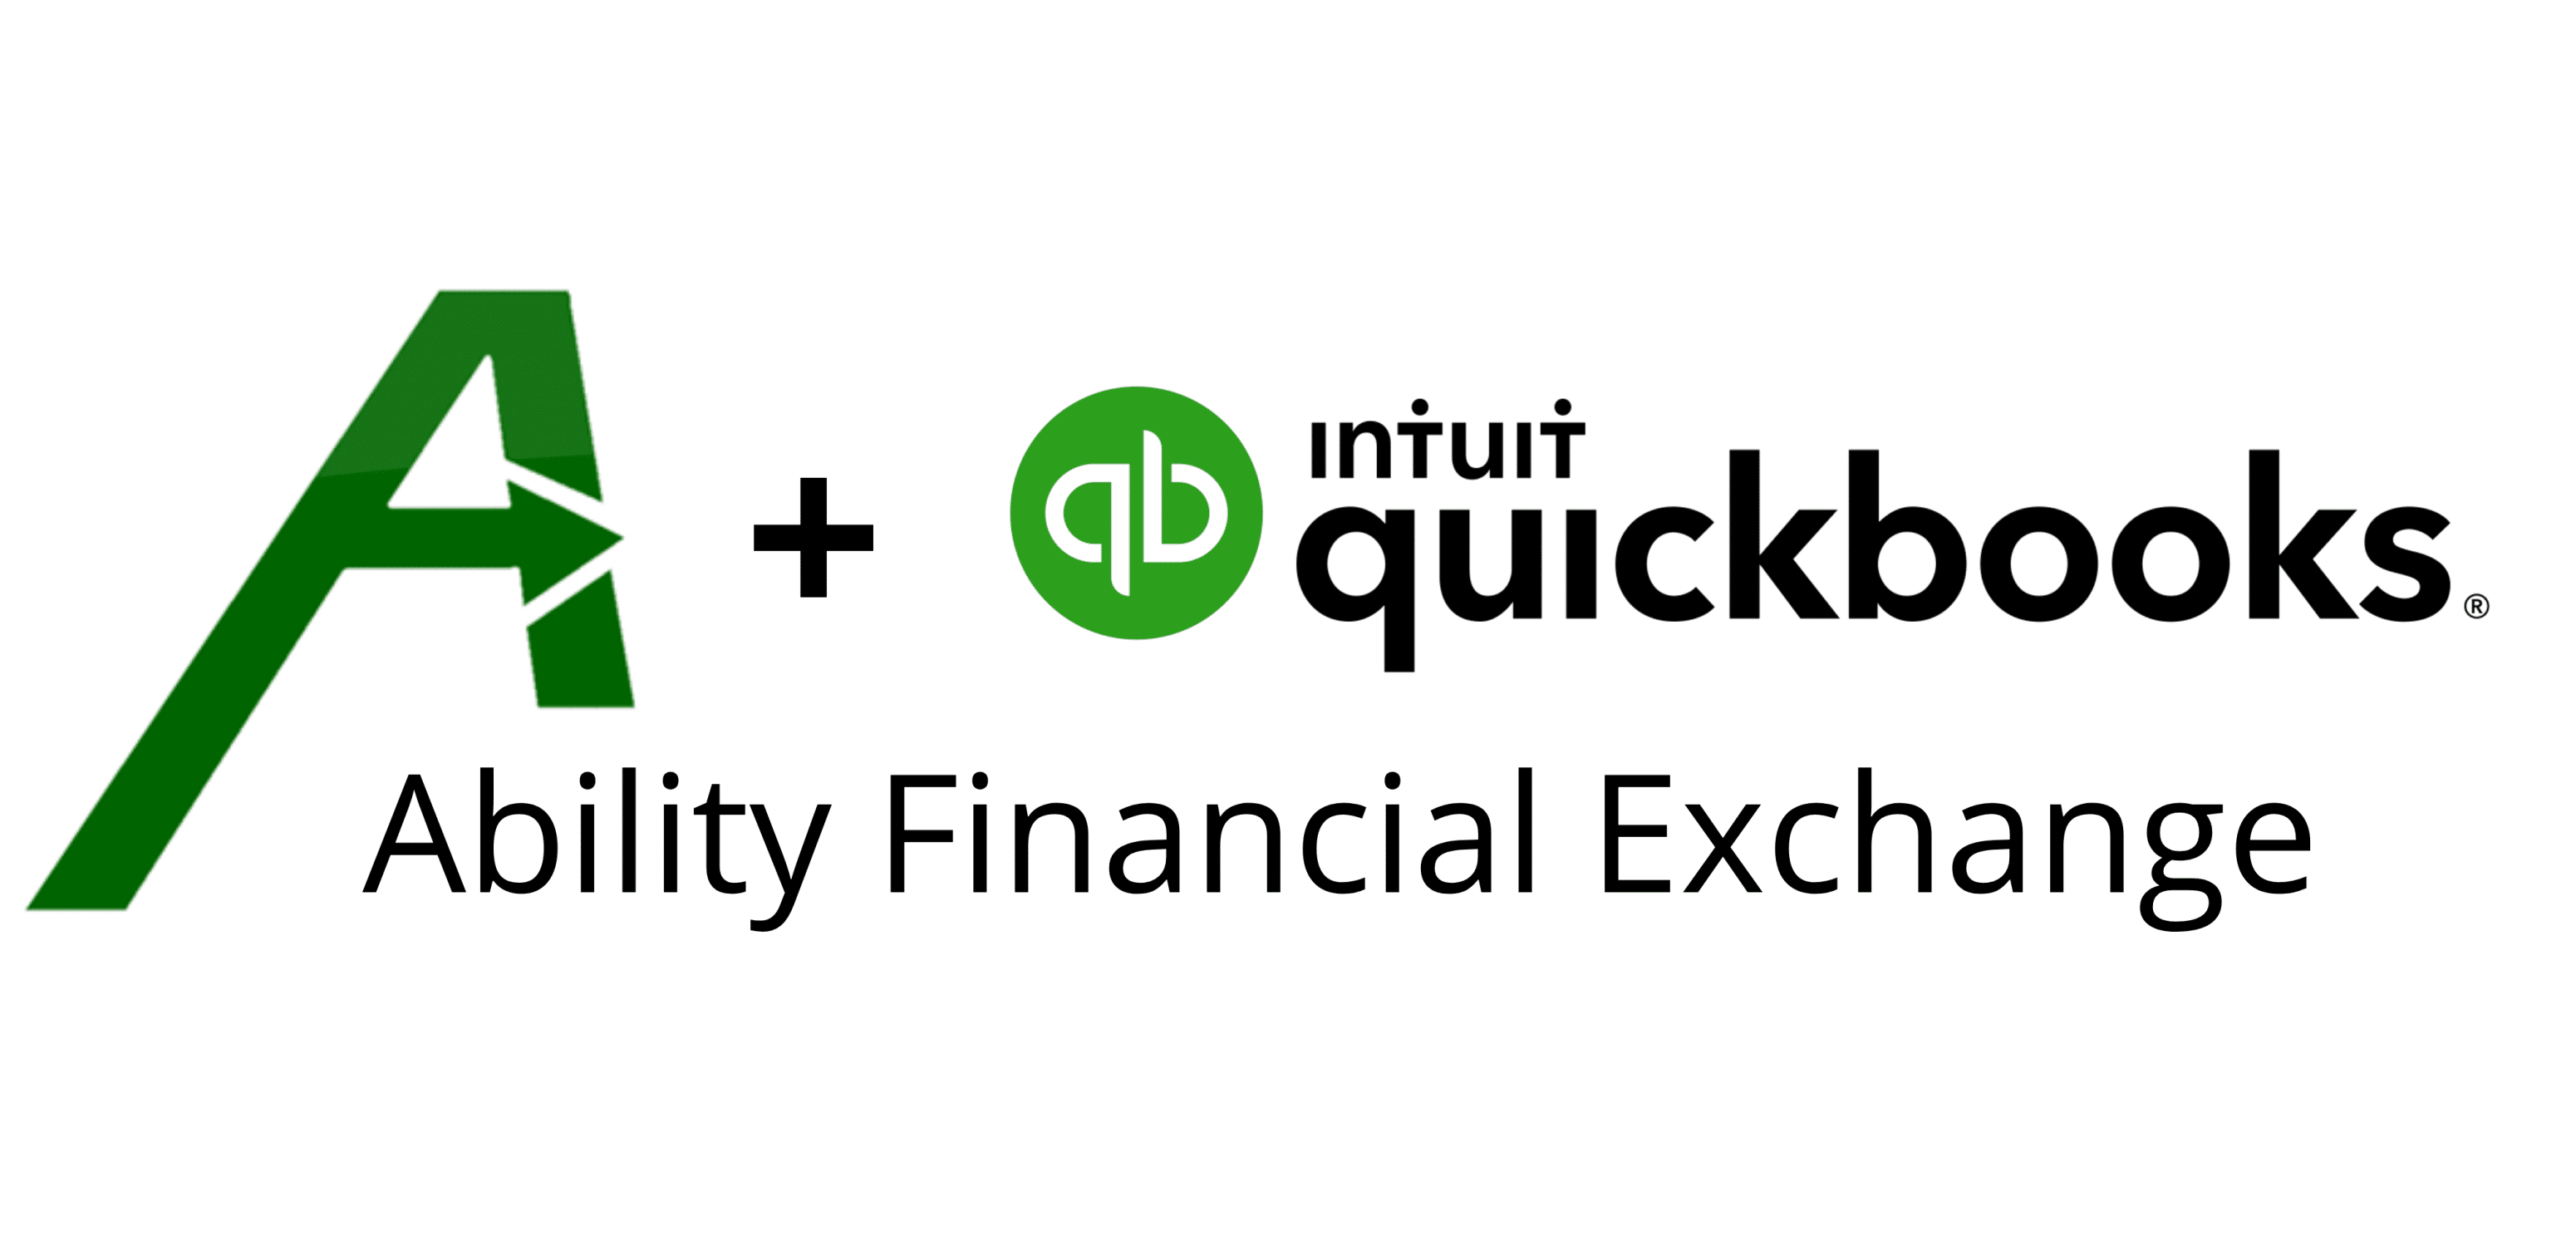 Importance of a scalable sync solution for QuickBooks Point of Sale: Ability Financial Exchange for QuickBooks Online